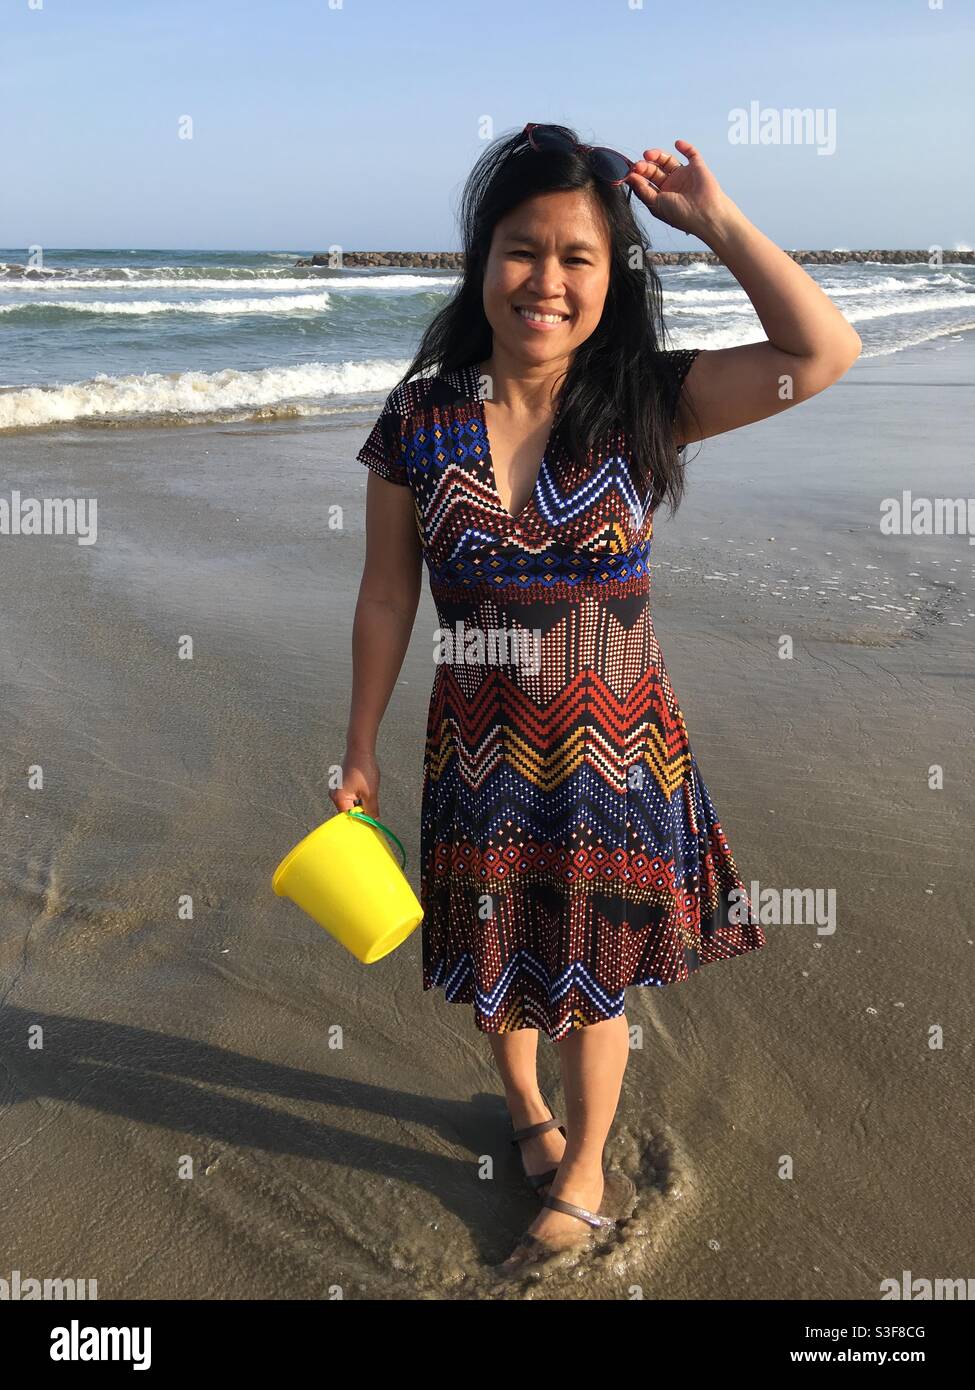 Cute Asian Filipino girl standing on the beach near the water with a yellow beach toy wearing a colorful pattern dress in Palavas les Flots near Carnon Plage, Montpellier, Occitanie, south of France Stock Photo